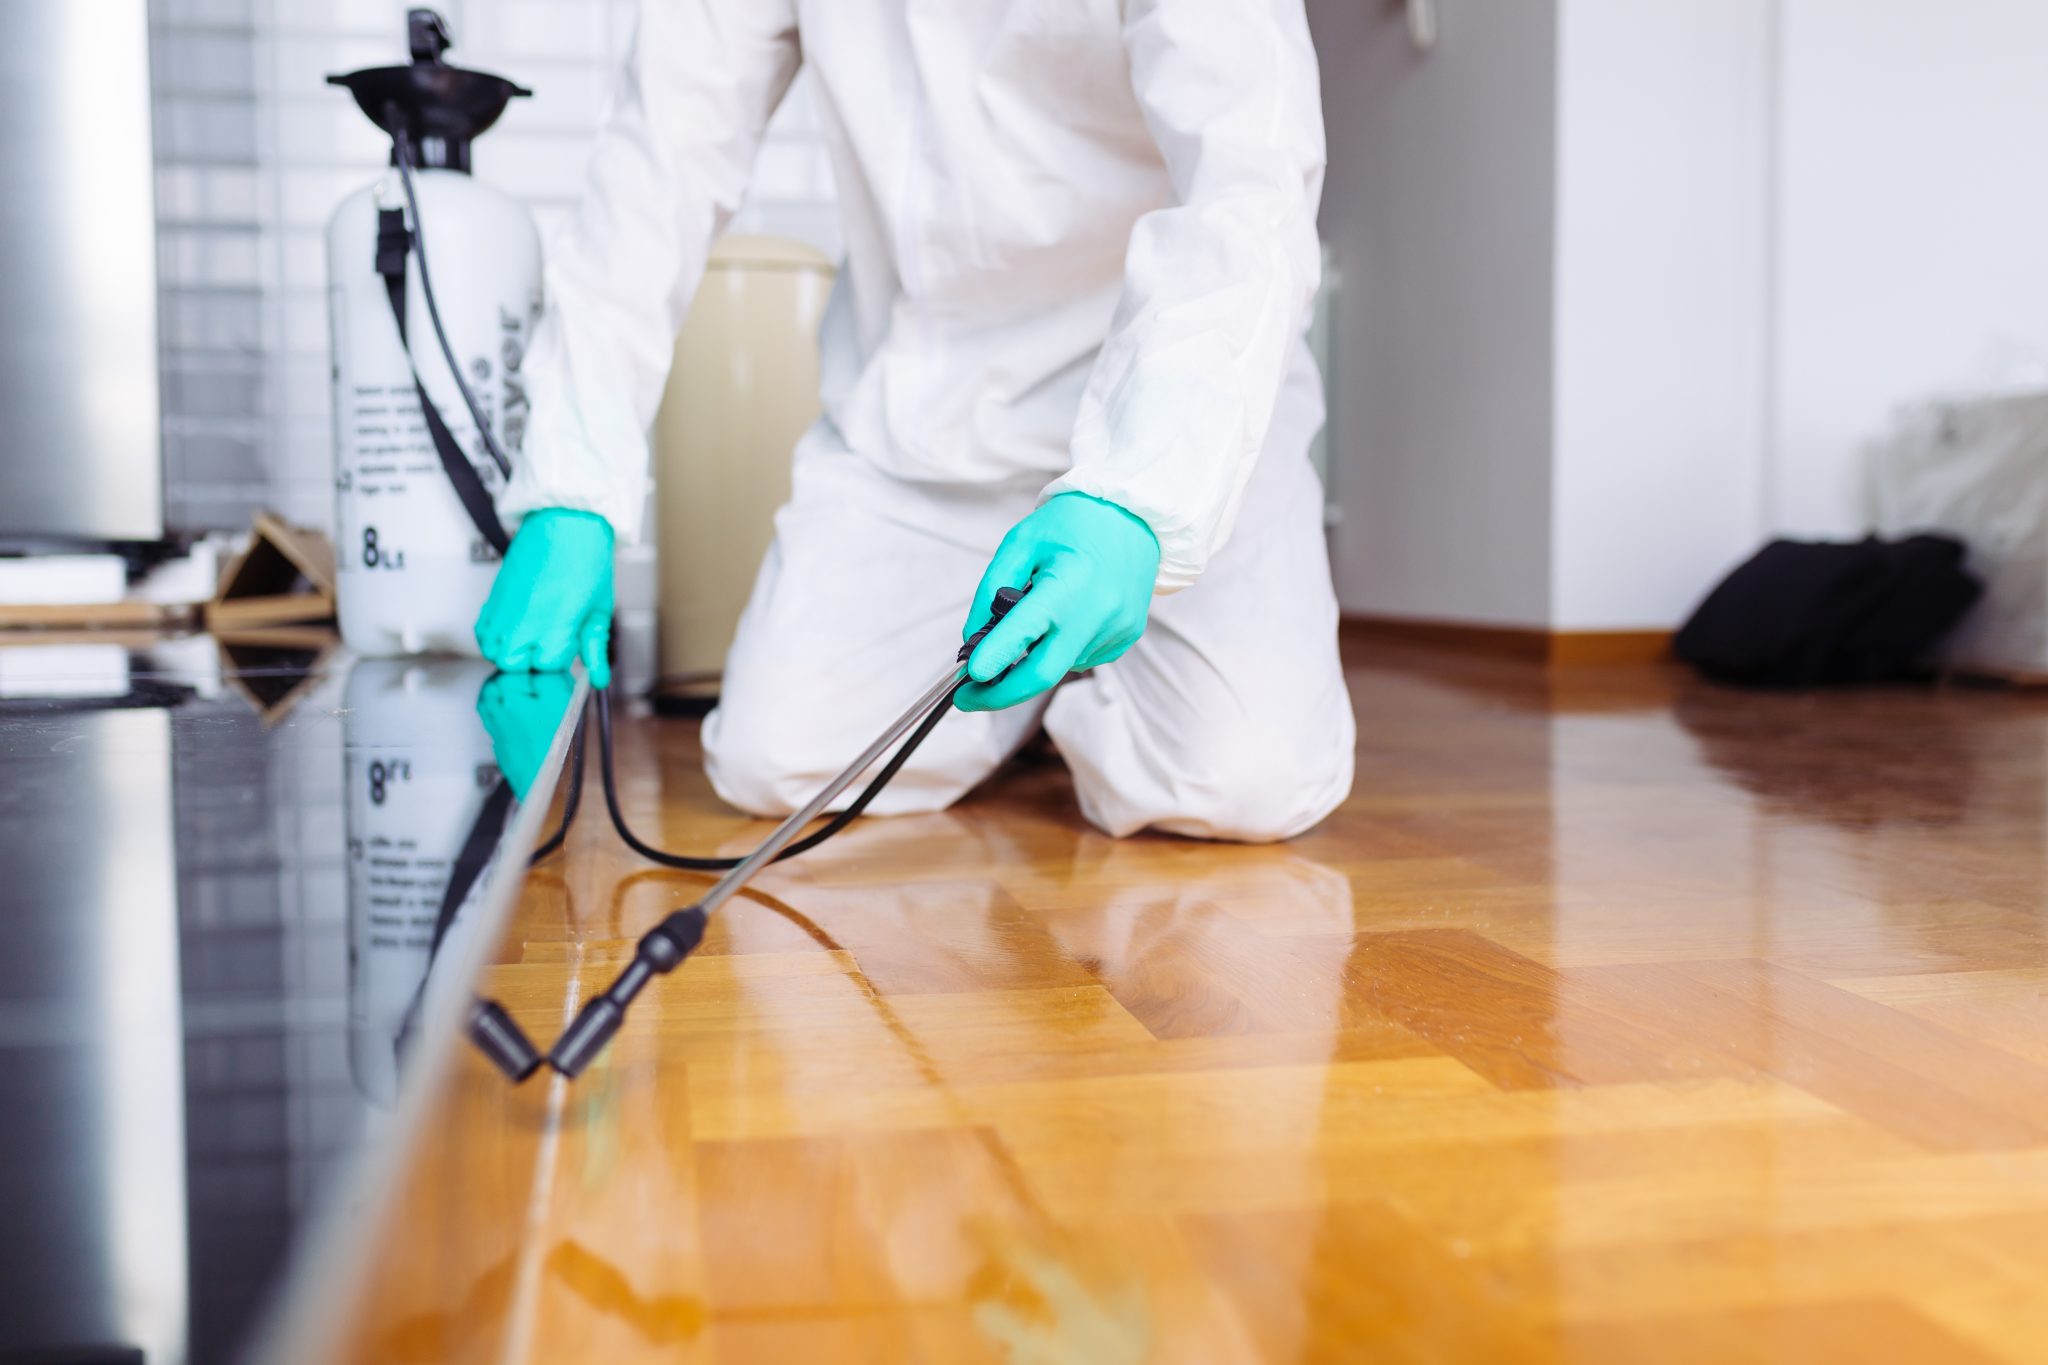 What You Need to Do After Pest Control Done in Your Home